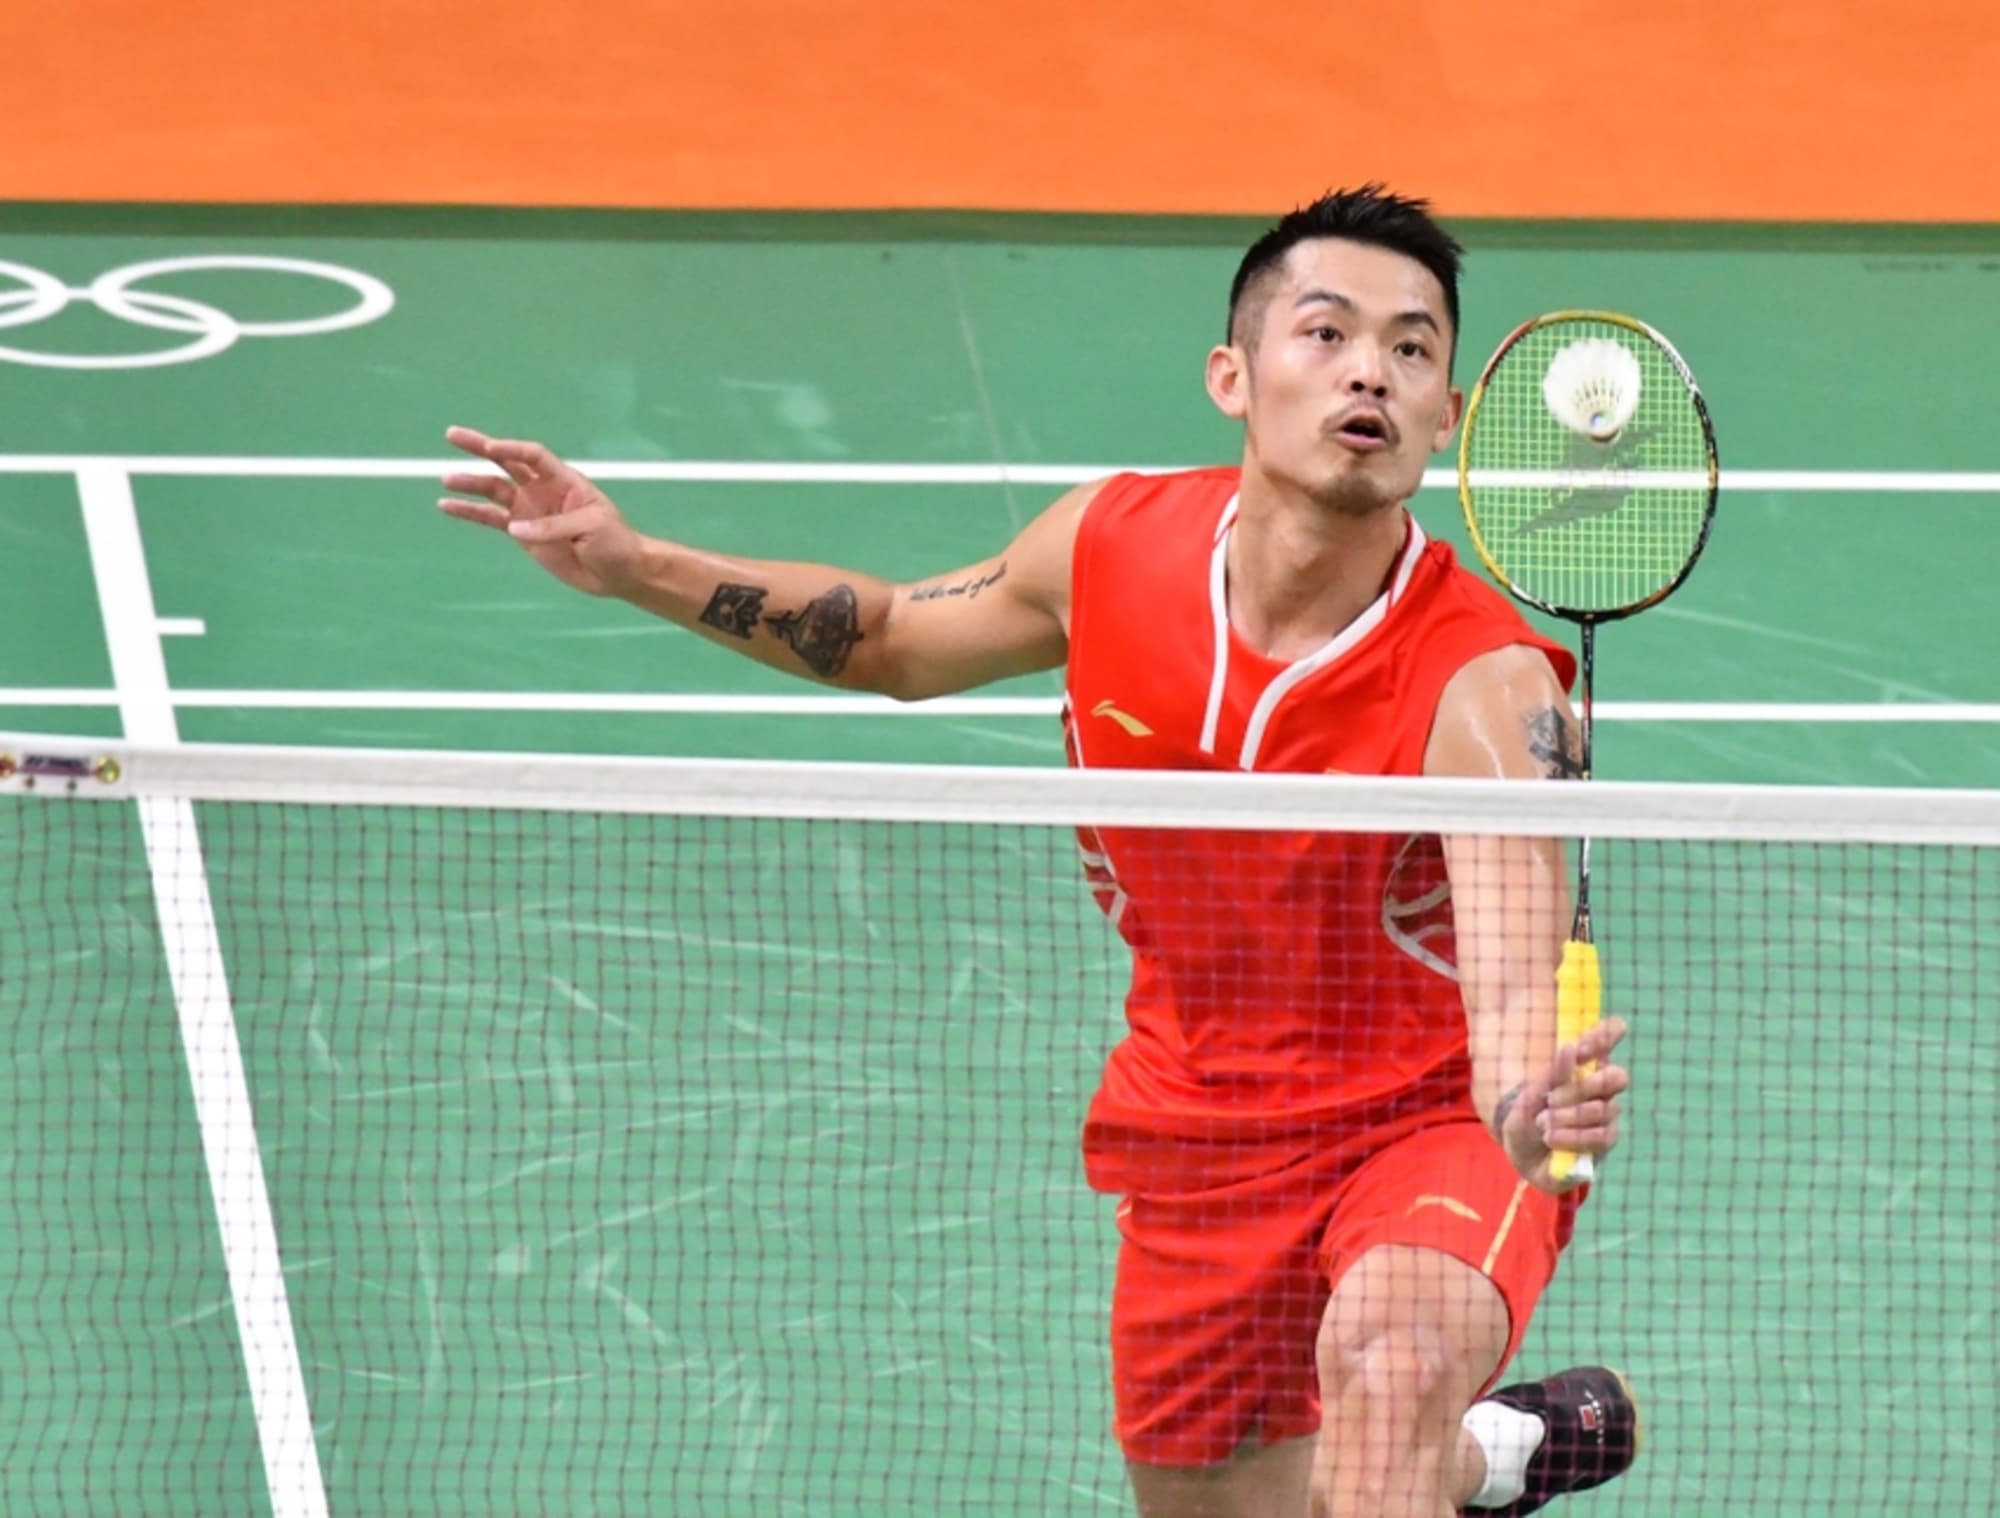 Olympic badminton live stream: Watch online - August 17